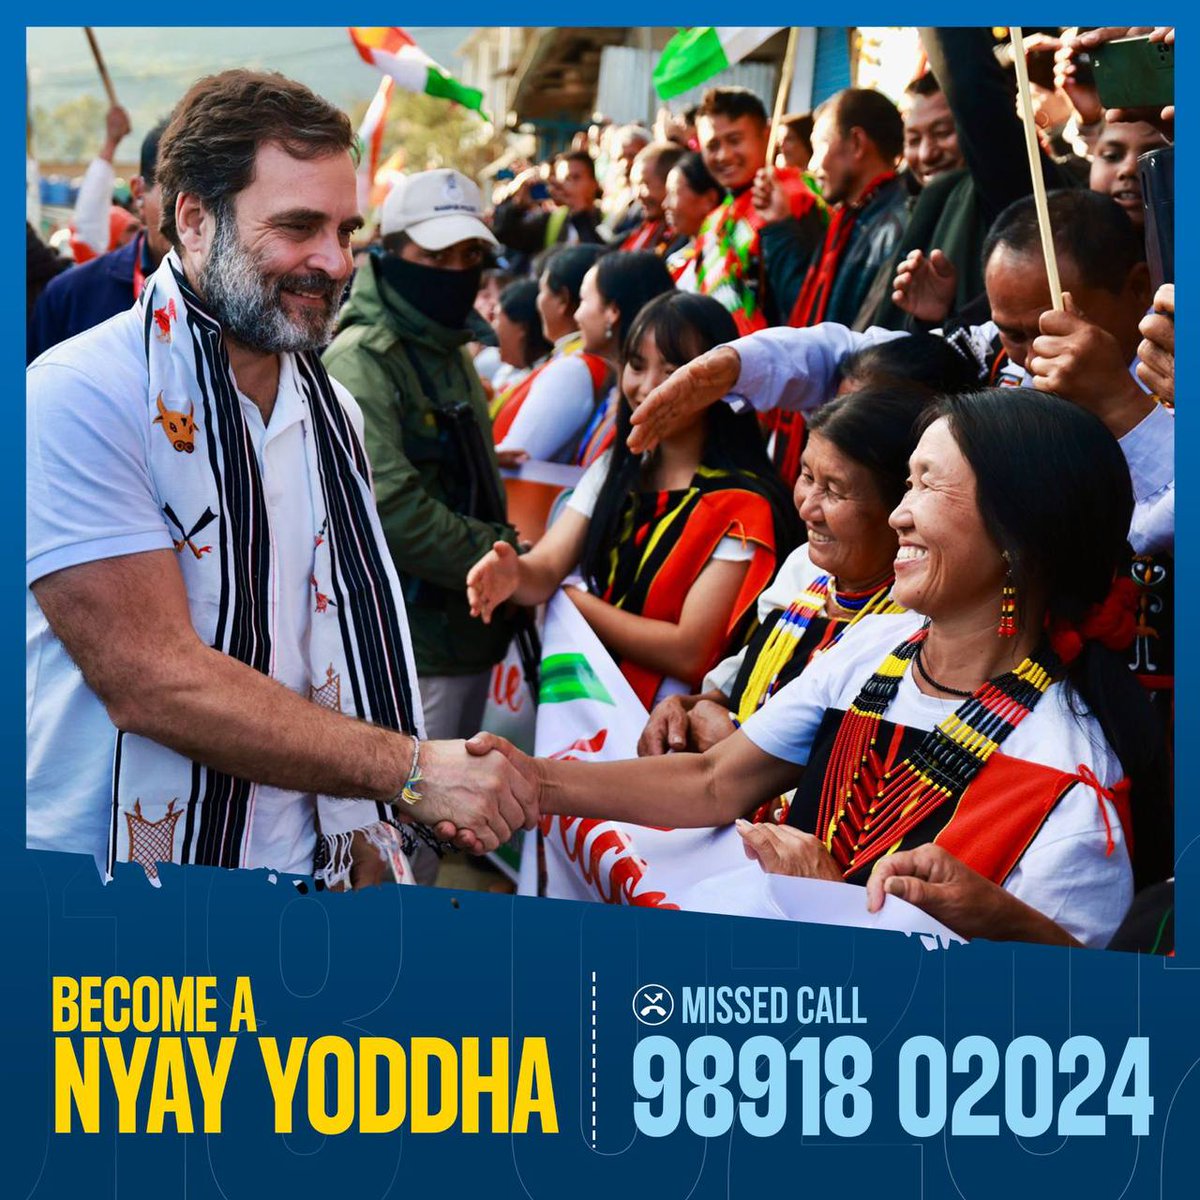 #BharatJodoNyayYatra of #JusticeWarriors will continue until the economic and social justice is upheld  . 
To become a #JusticeWarrior, register today on the website bhartjodonyayyatra.com. Or give a missed call to +91 9891802024.